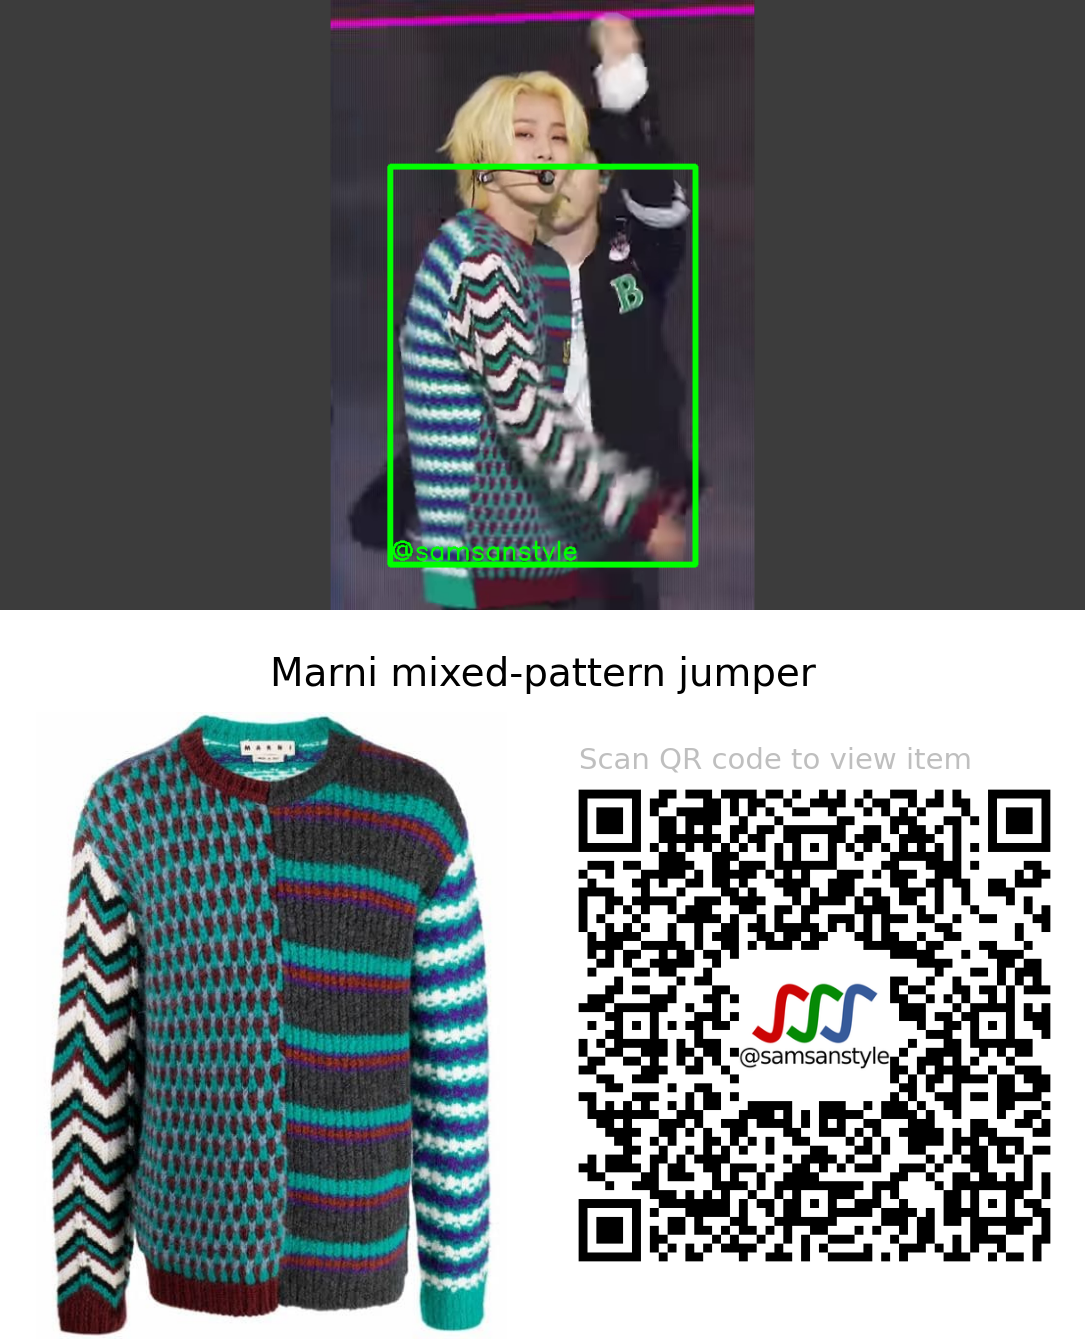 WEi Yongha | Too Bad SBS MTV The Show | Marni mixed-pattern jumper